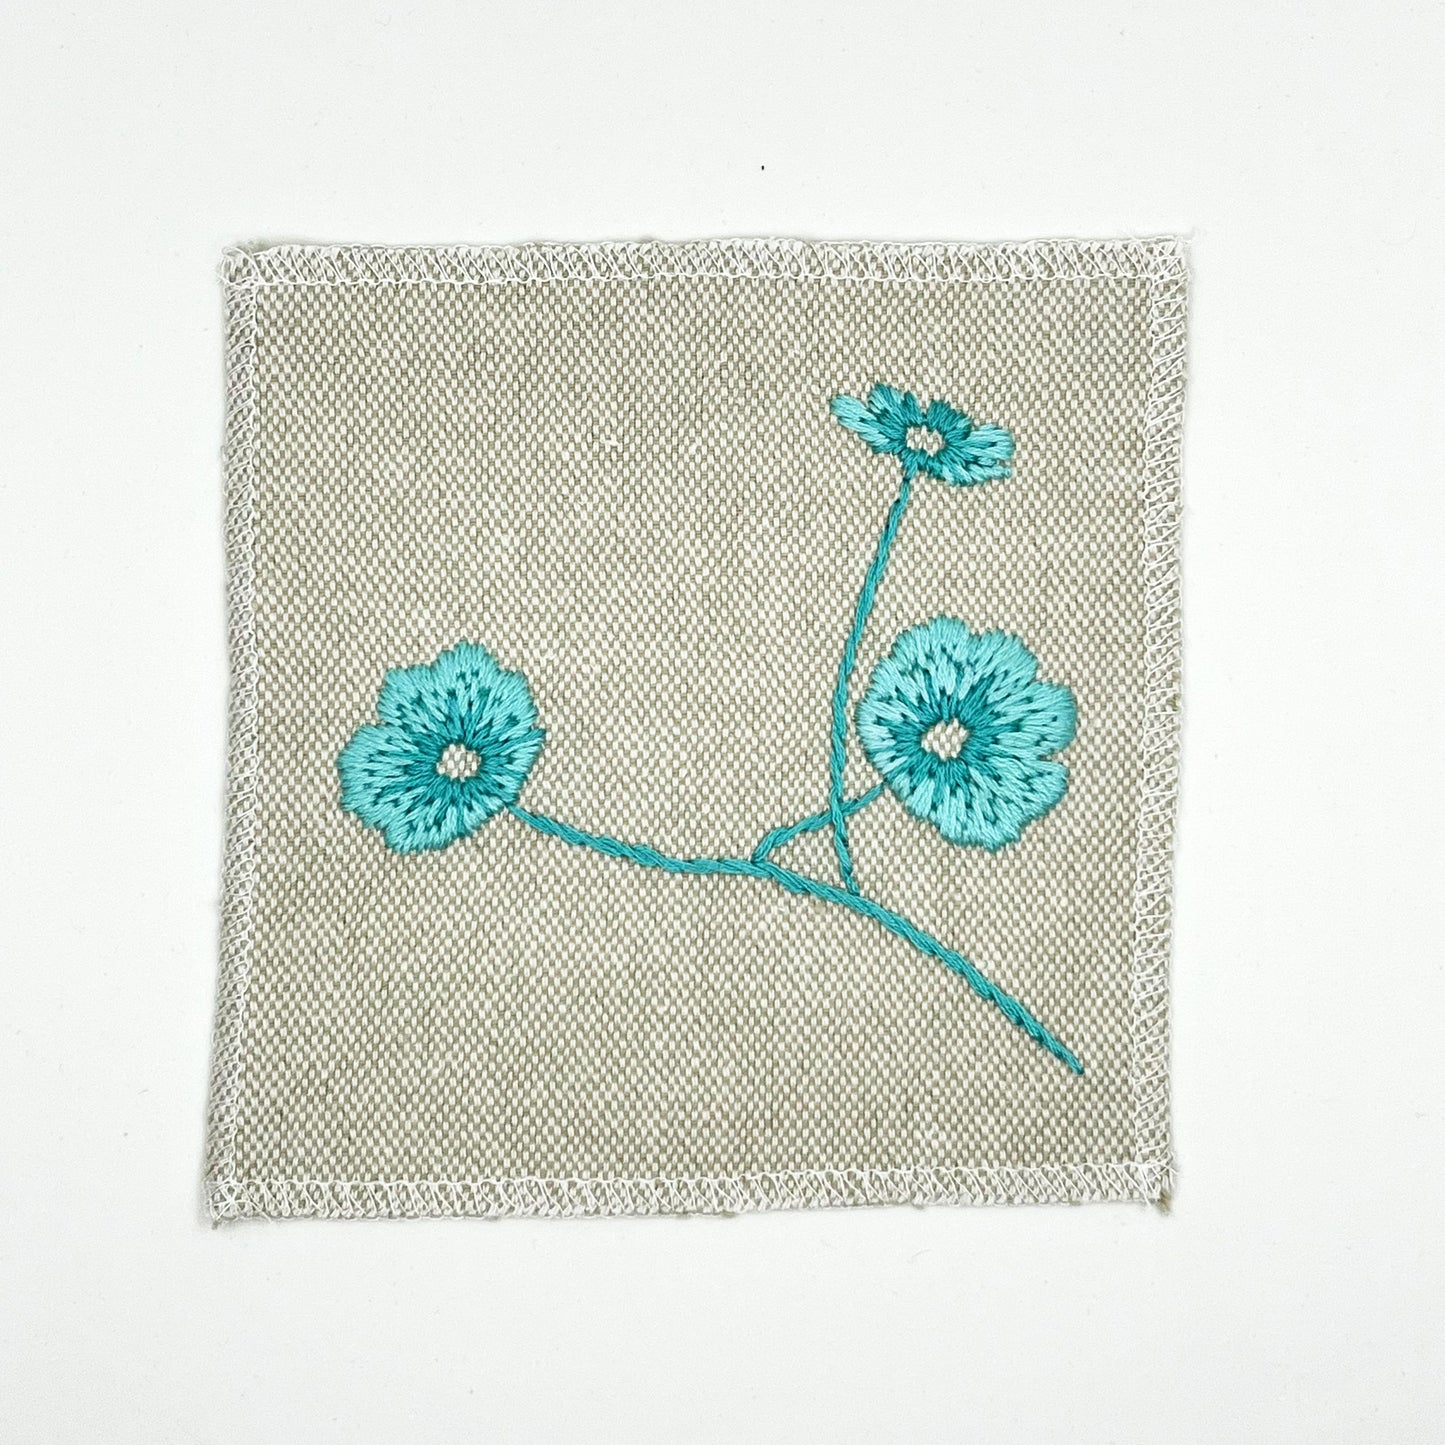 a natural colored square patch, hand embroidered with three poppies on a stem, in shades of robin's egg blue, with overlocked edges, on a white background